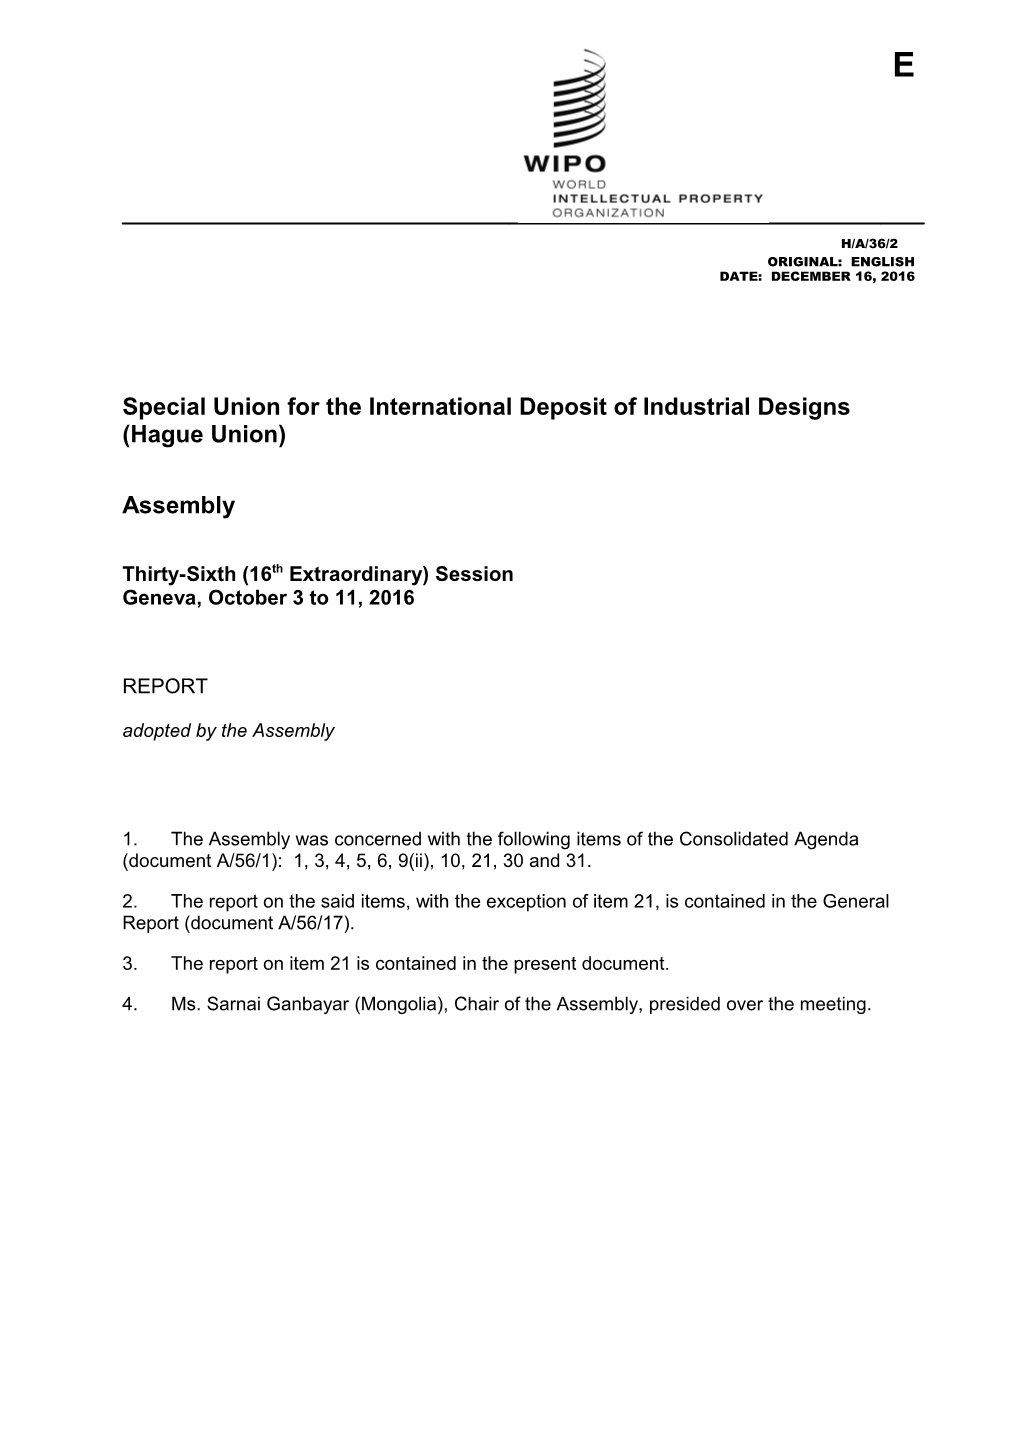 Special Union for the International Deposit of Industrial Designs (Hagueunion)